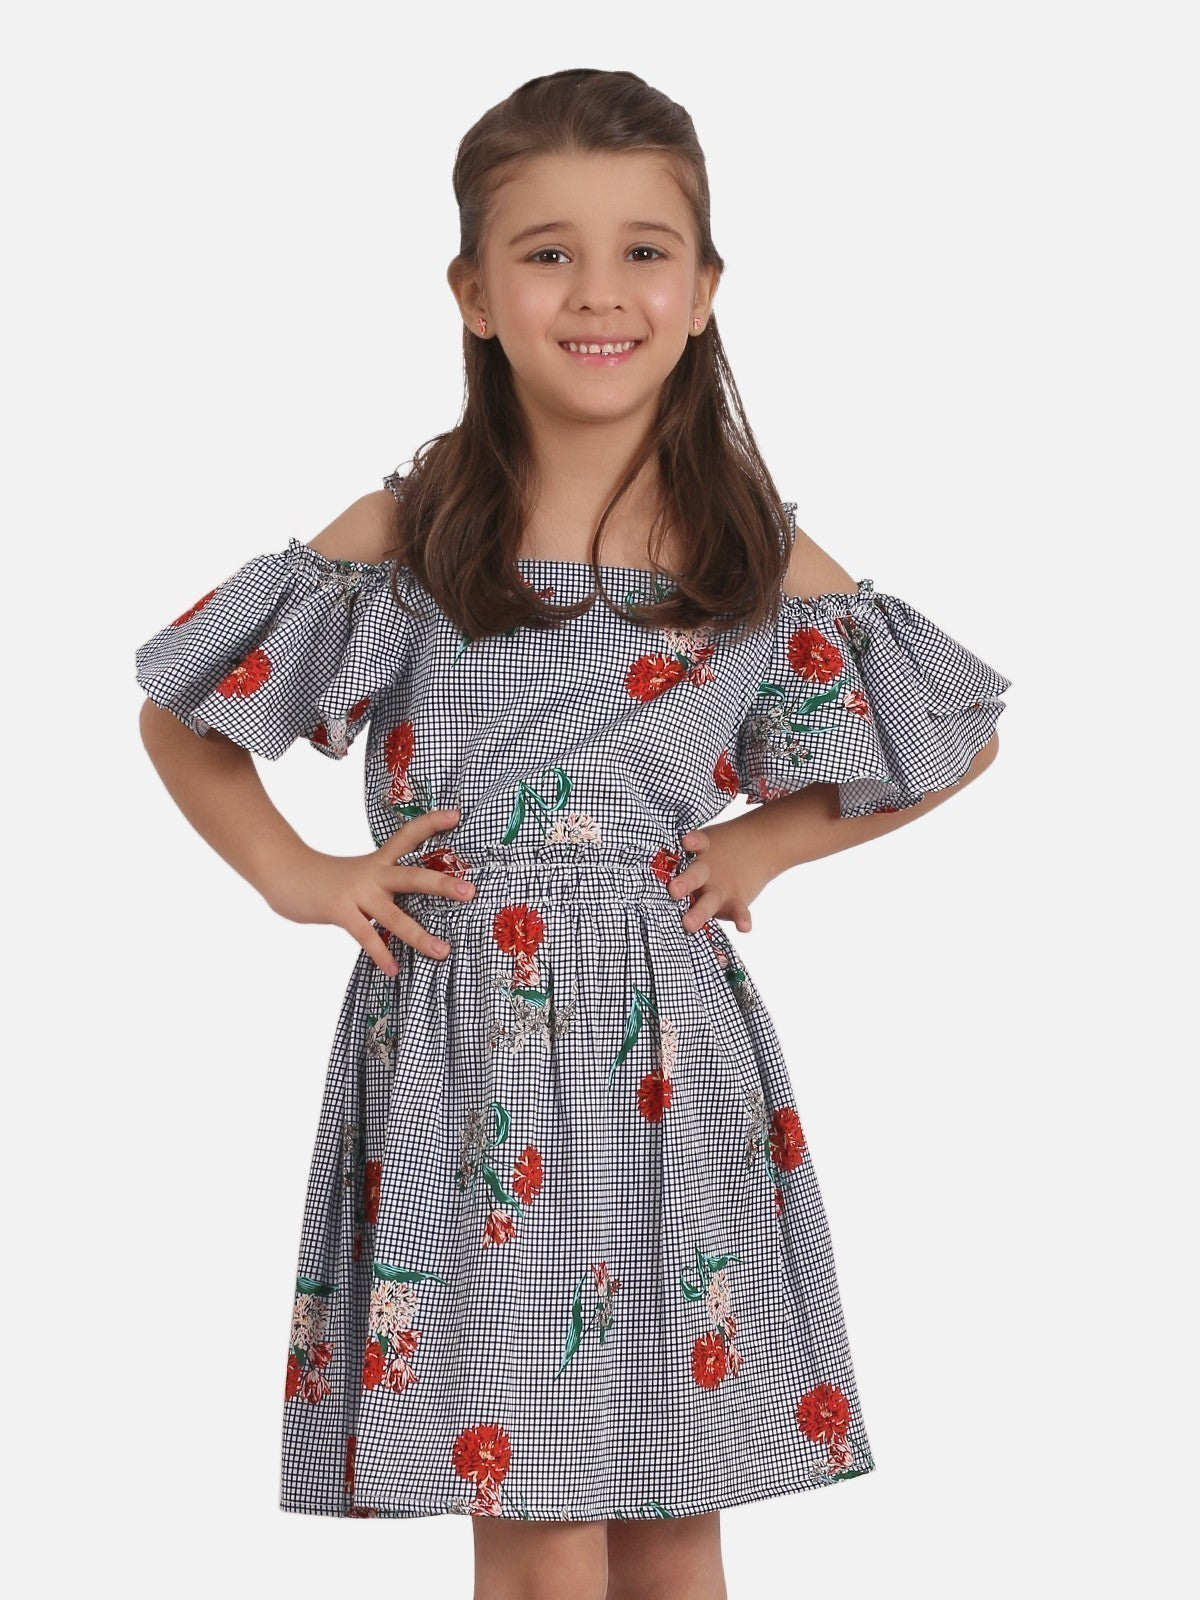 Girl's Blue Check Frock - EGTFW19S-215